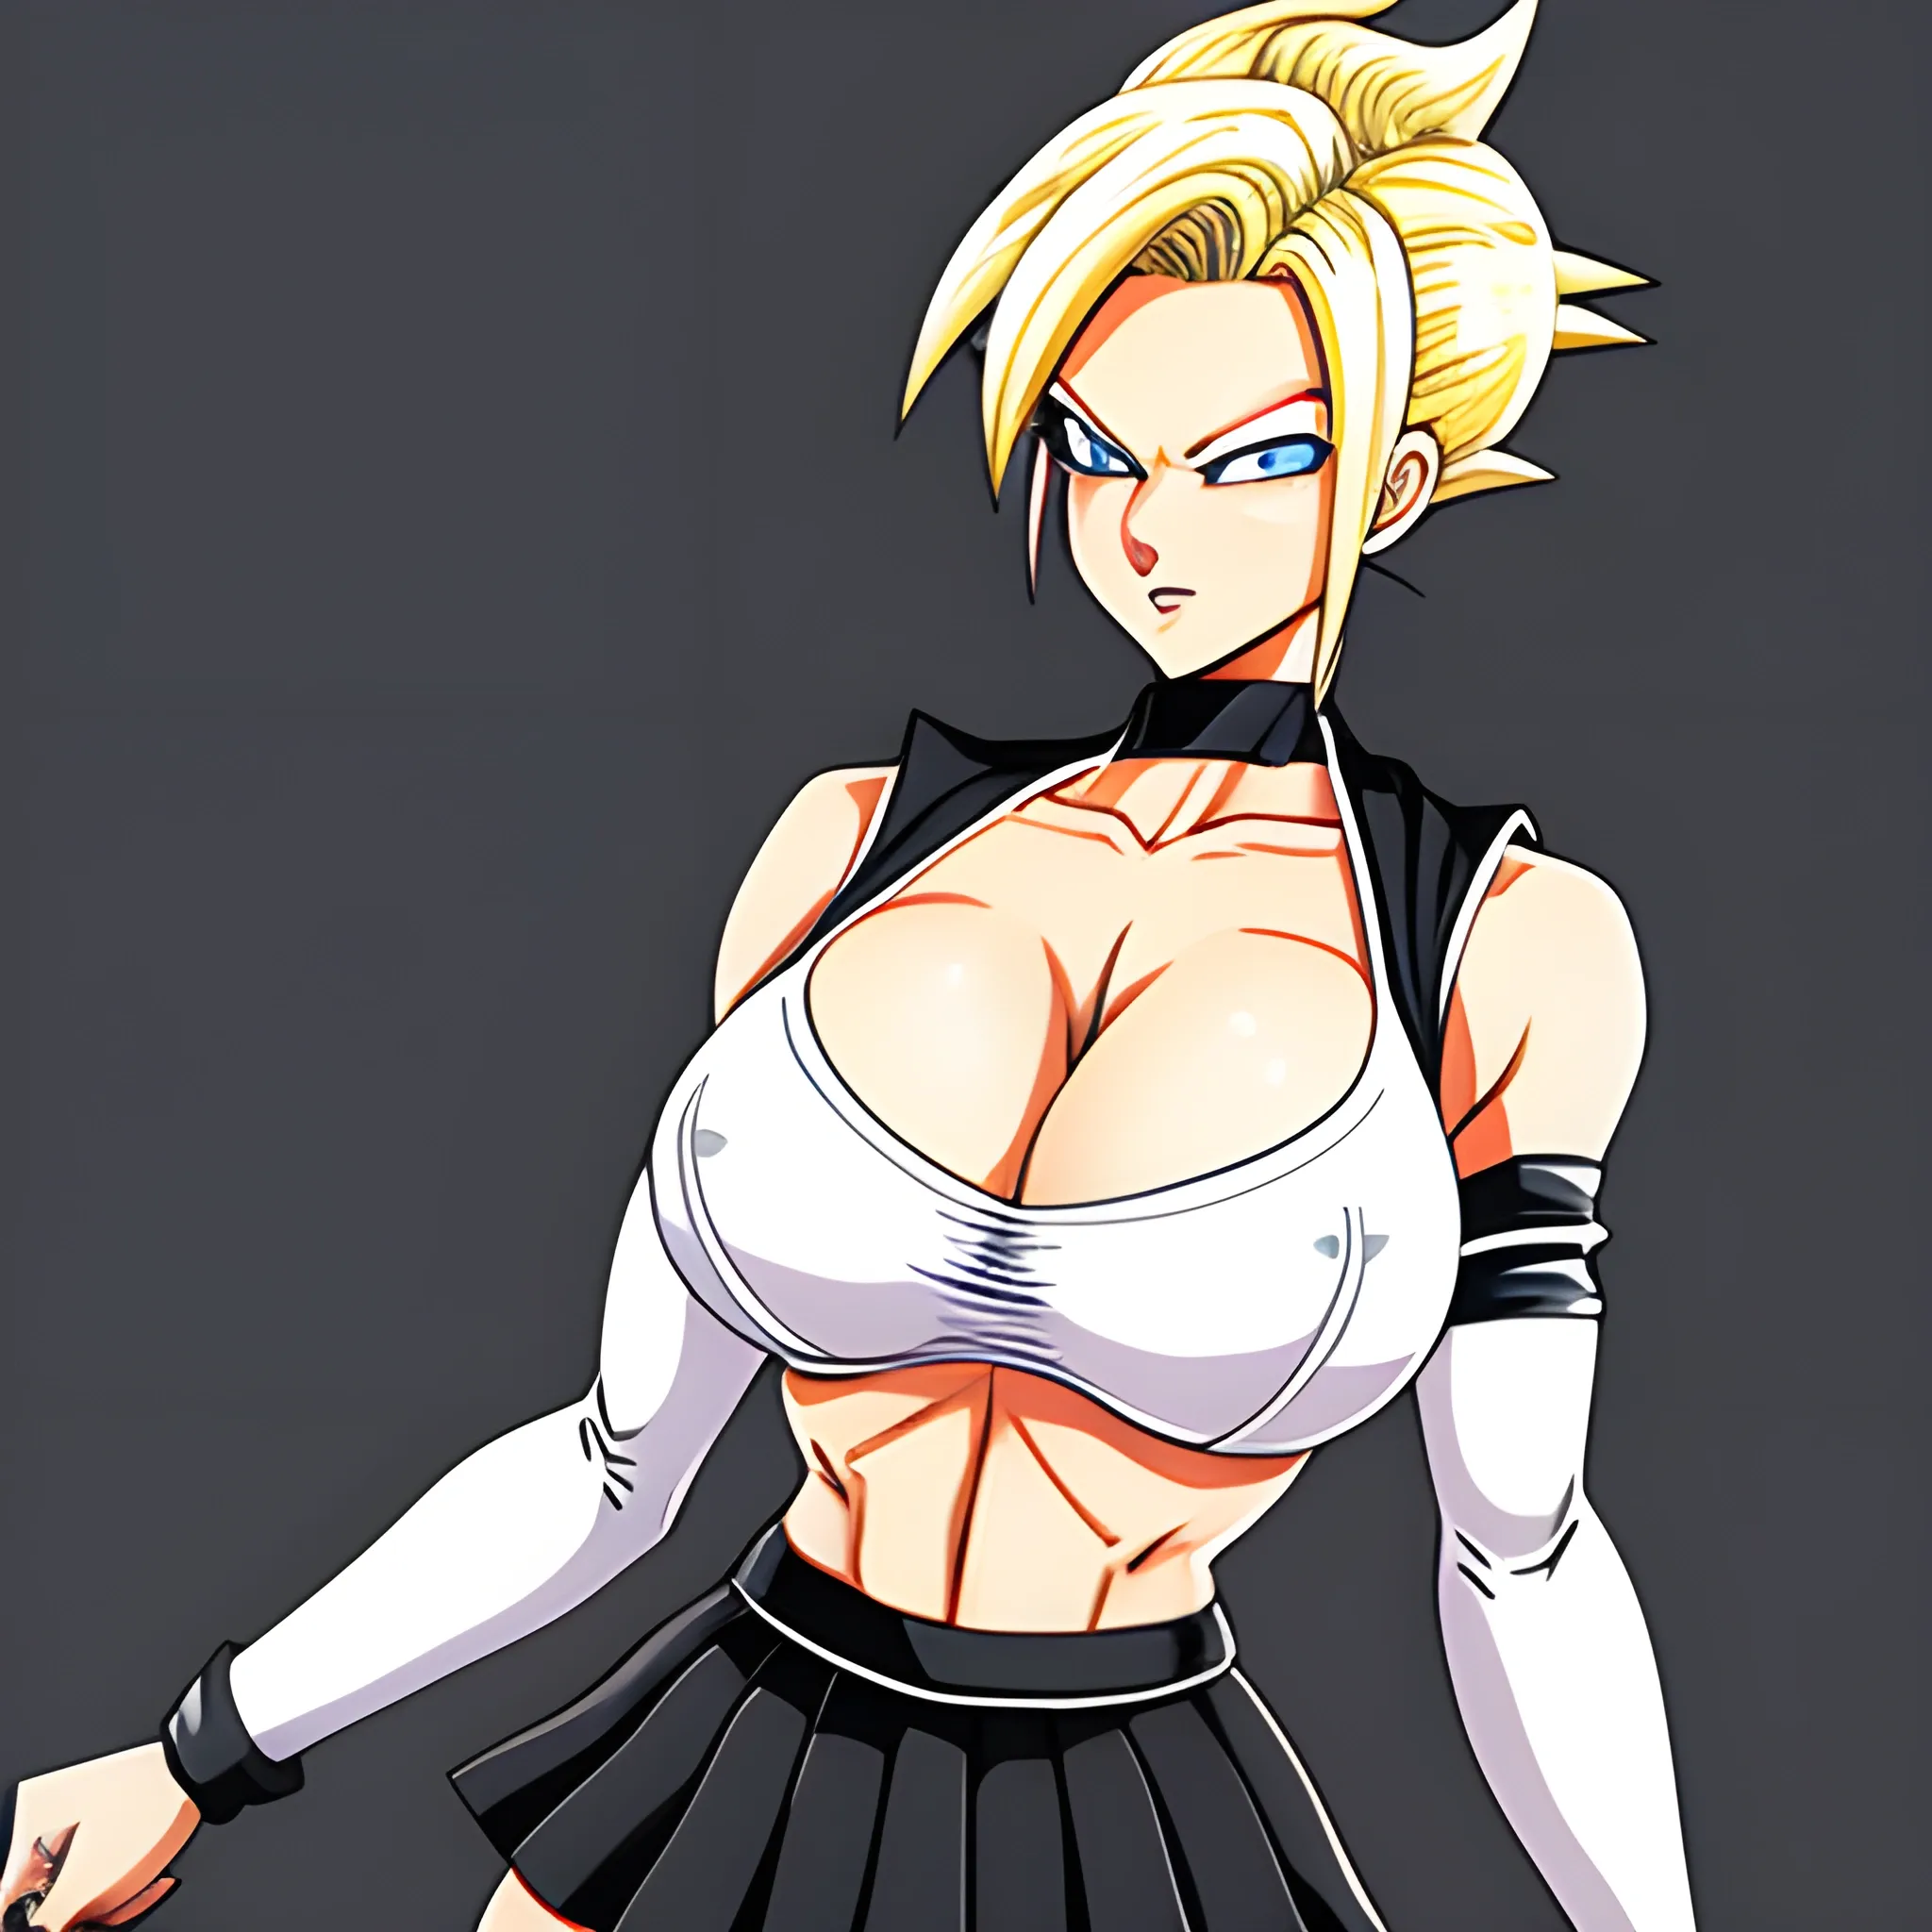 1 girl, short blonde hair, blue eyes, pierced left eyebrow, D-cup breasts, wide hips, toned thighs, six pack, white long-sleeved top with black stripes mid-length, black skirt, black pantyhose, black sneakers, dragon ball z art style